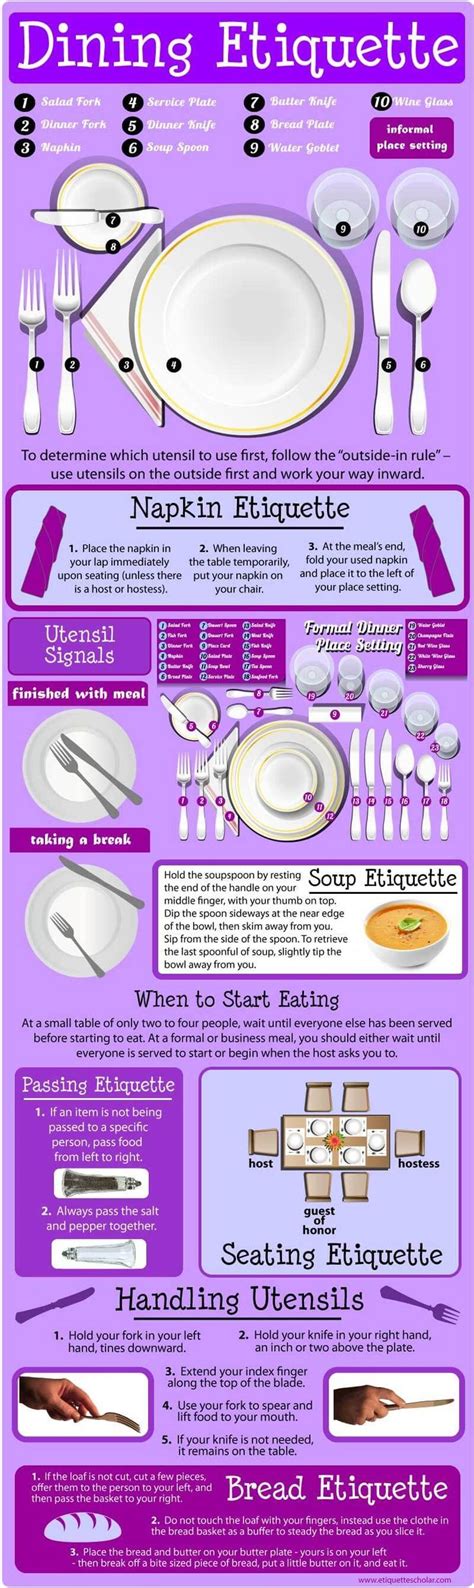 The Complete Dining Etiquette Guide! - Check out 100s of dining etiquette how-to lists! | Dining ...